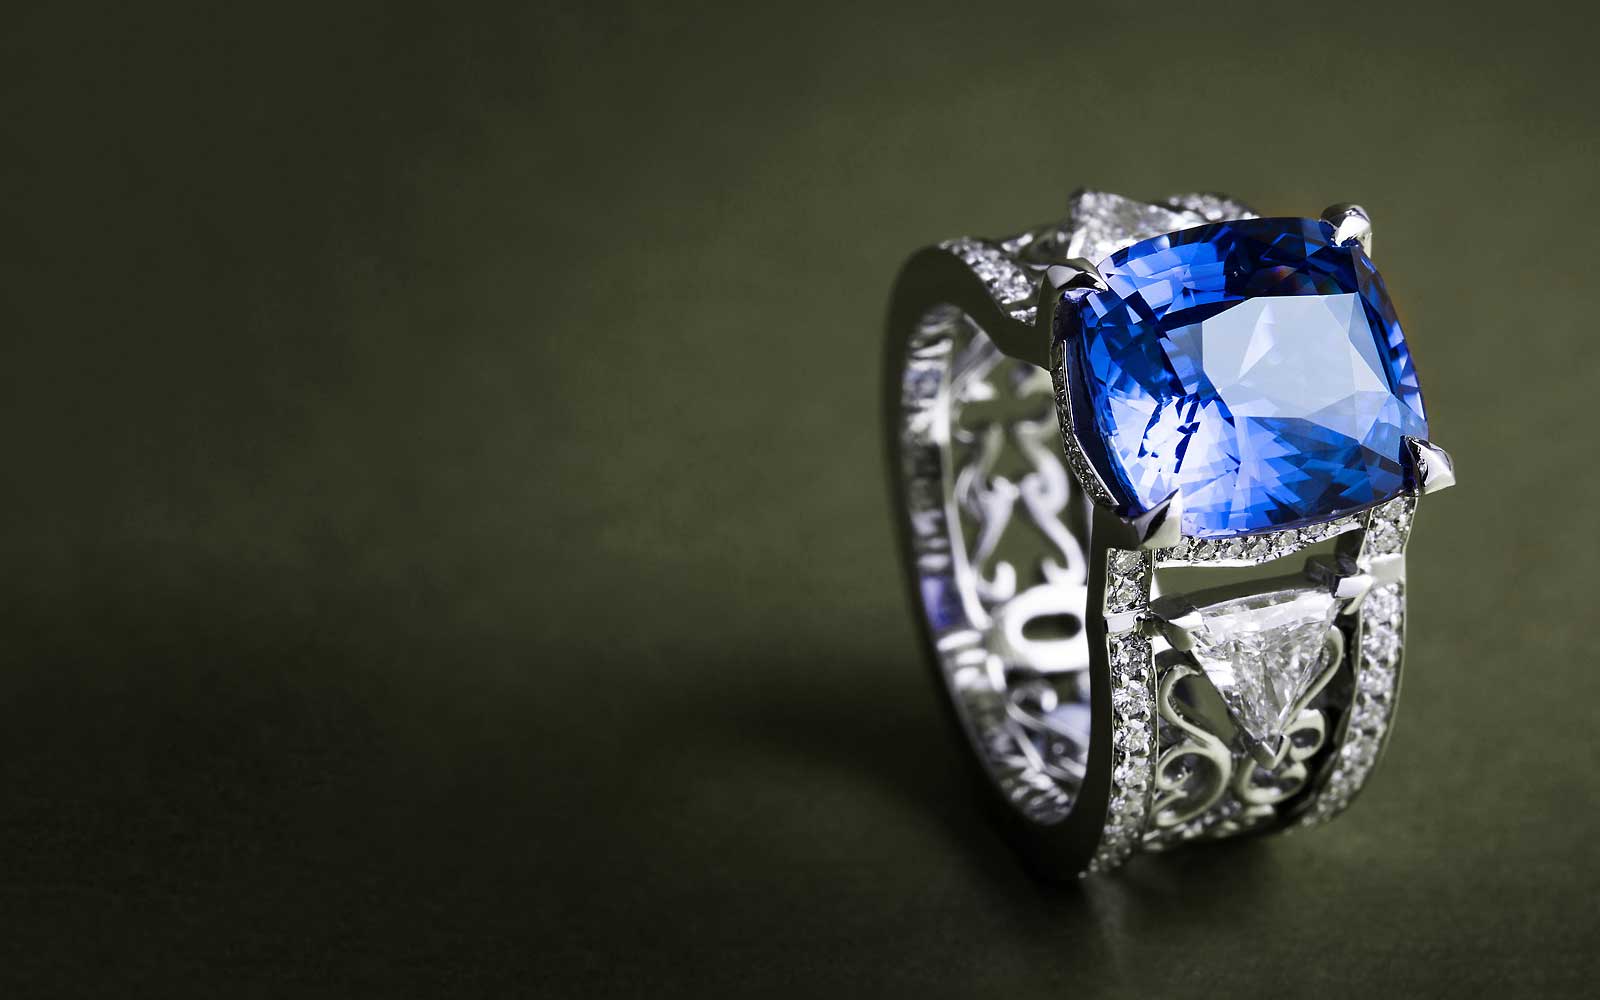 A bespoke cocktail ring, boasting a cushion-cut blue sapphire, conflict-free diamonds and intricate filigree work